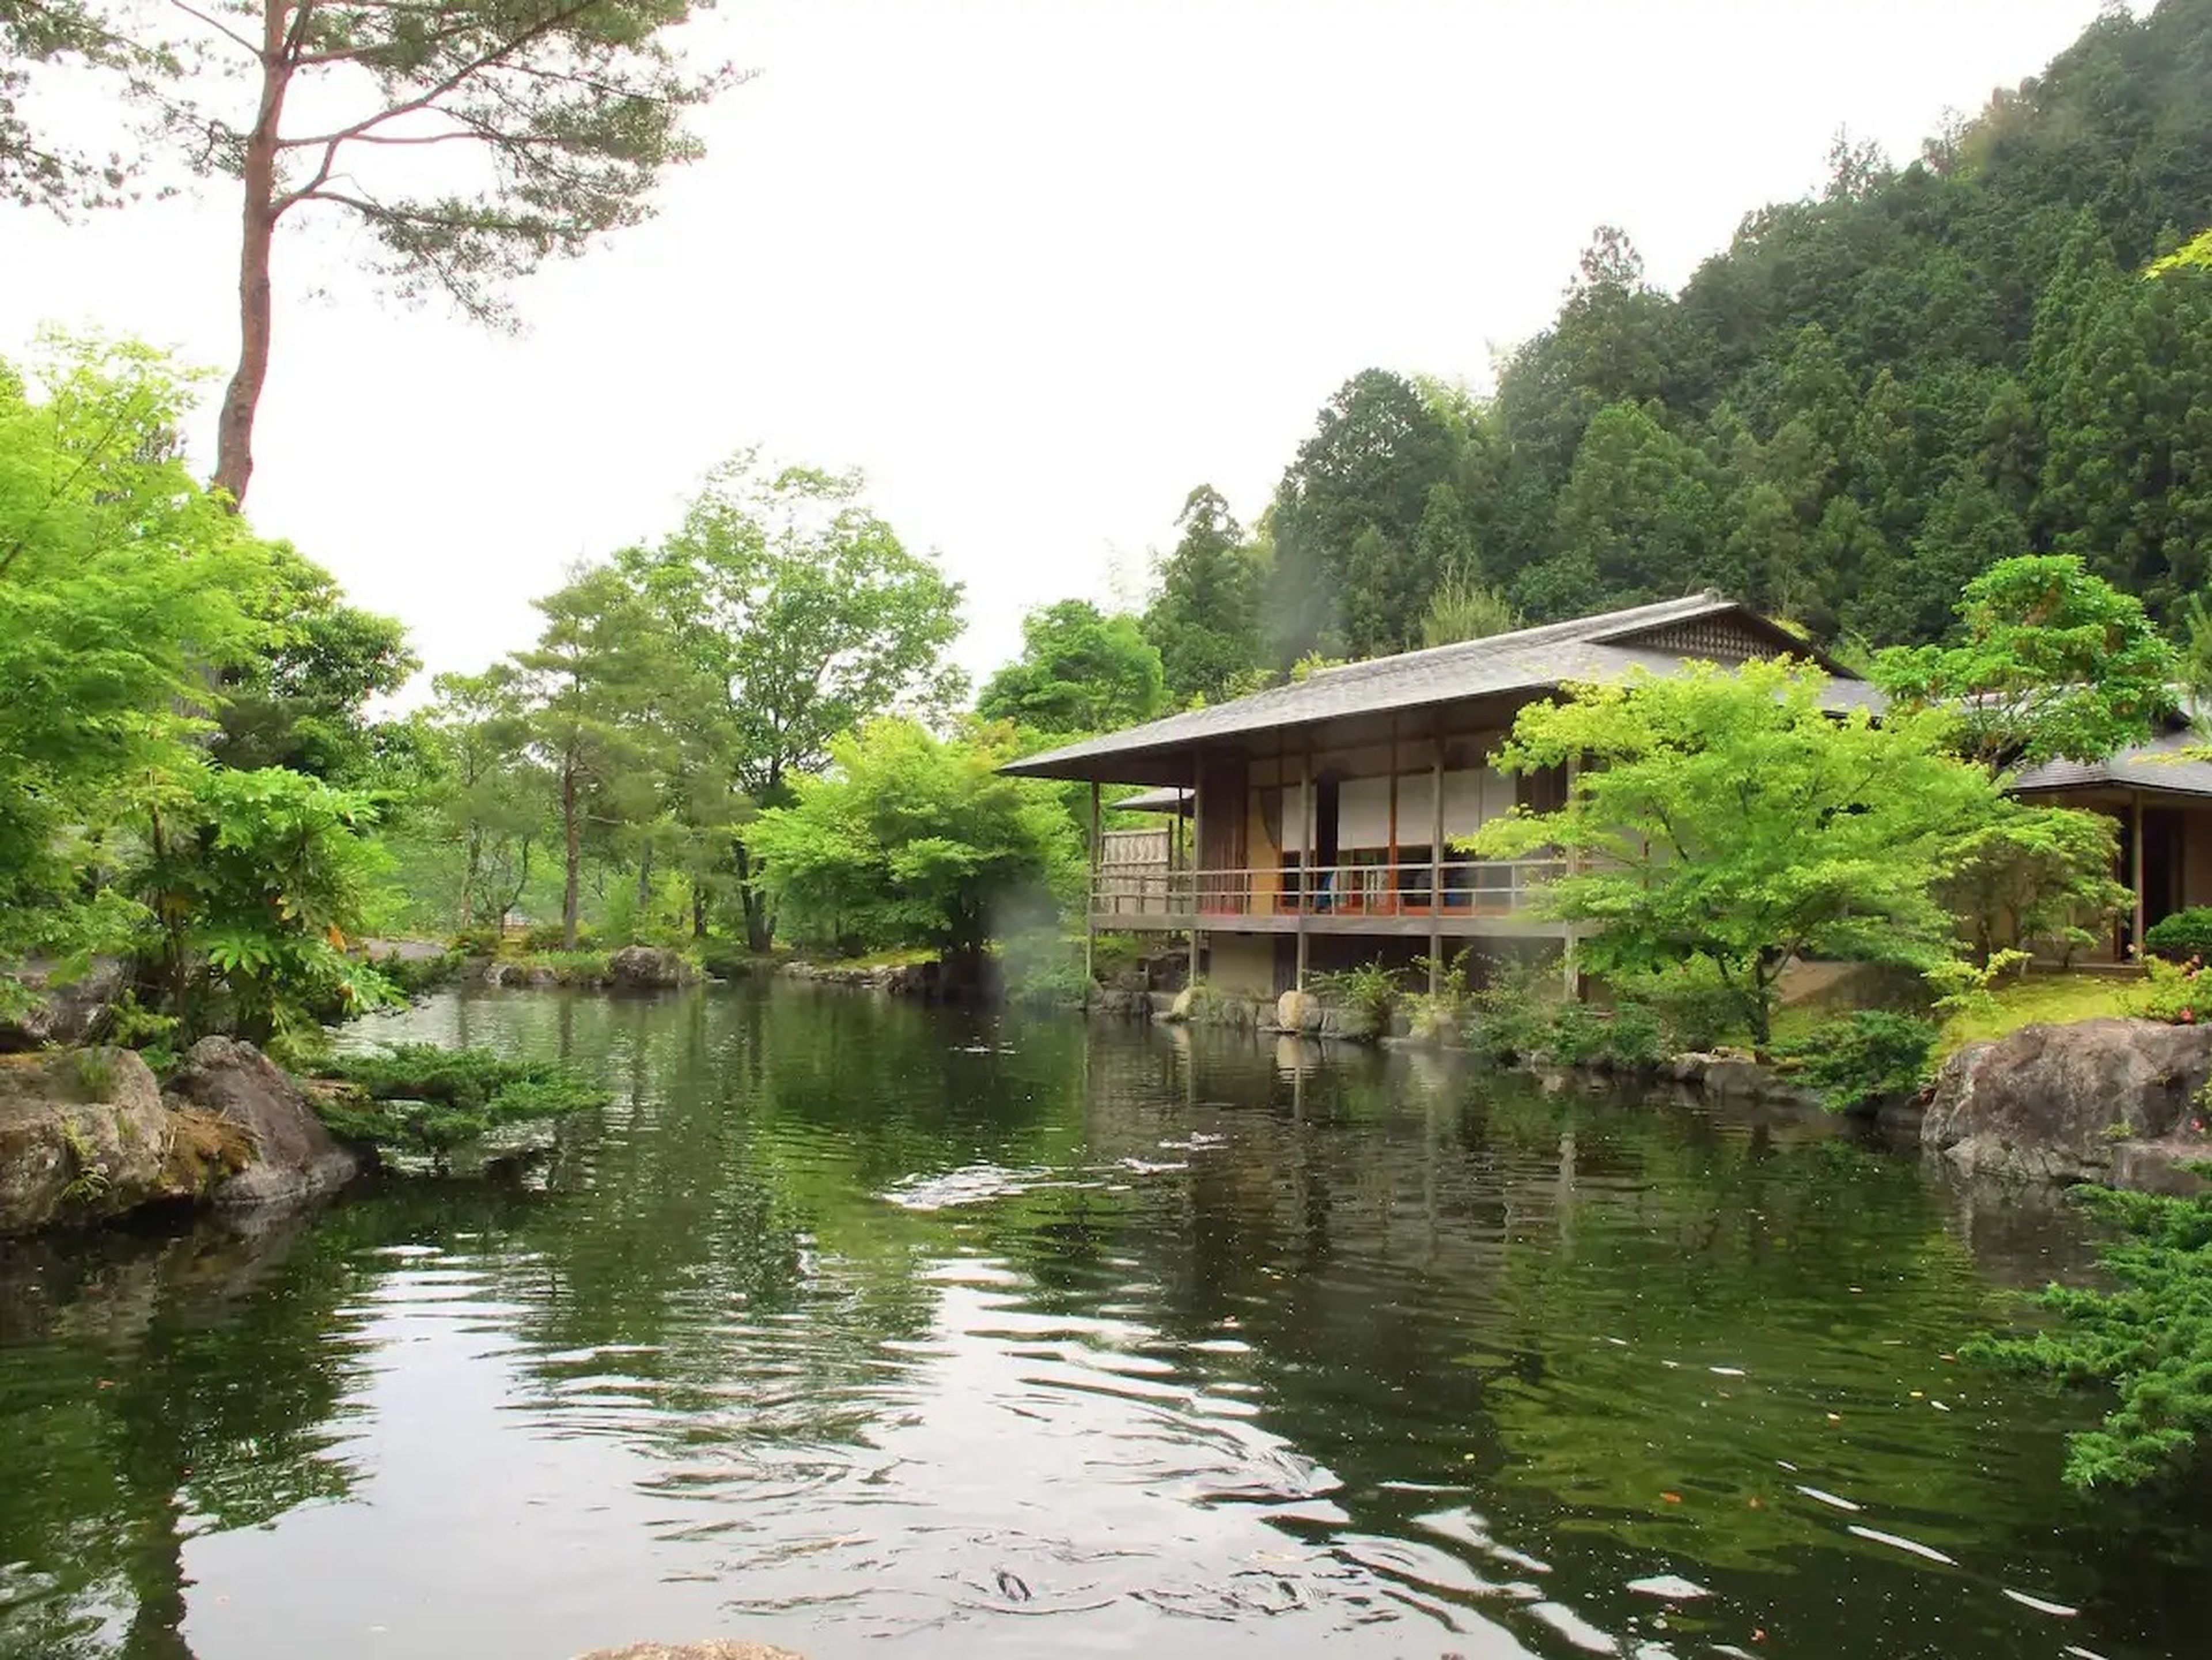 The exterior of the restored ryokan.